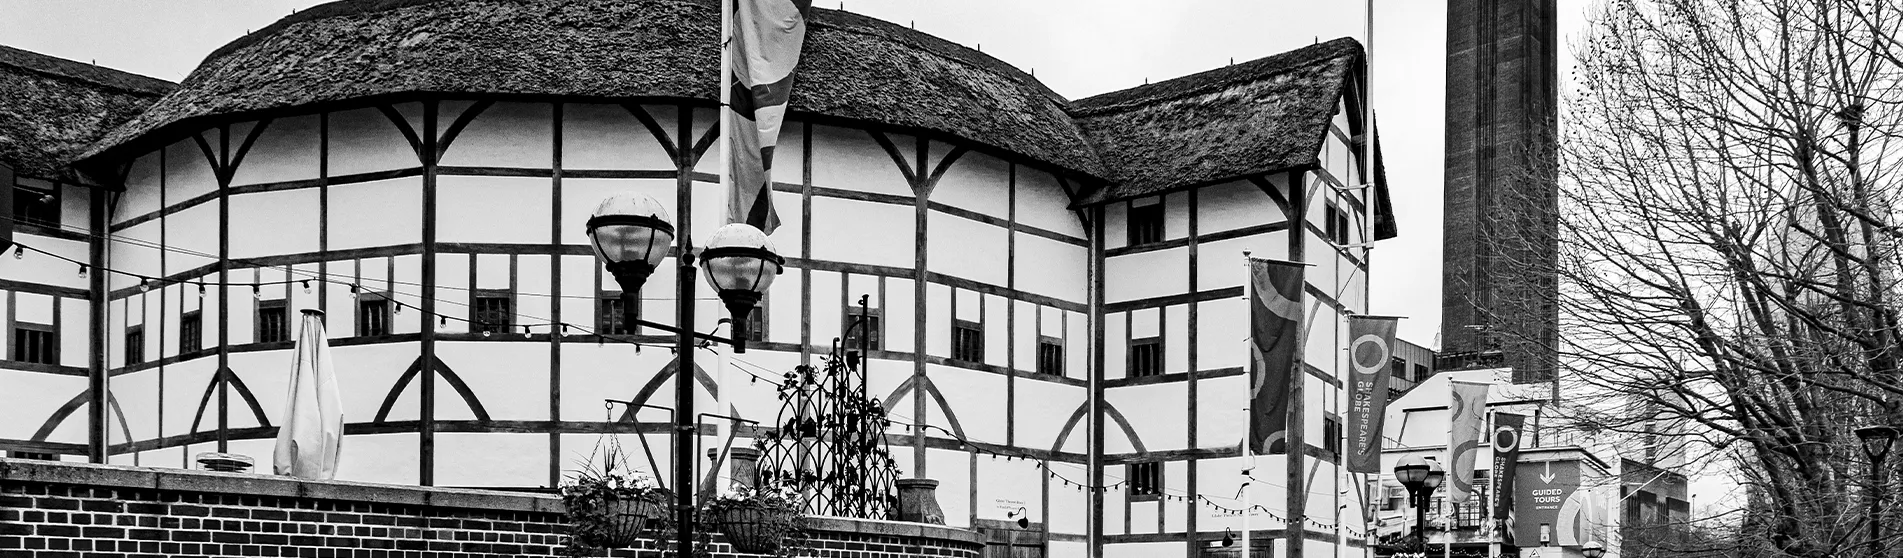 A black and white image of The Globe Theatre in London, an Elizabethan building with an iconic circular structure, taken from the outside.